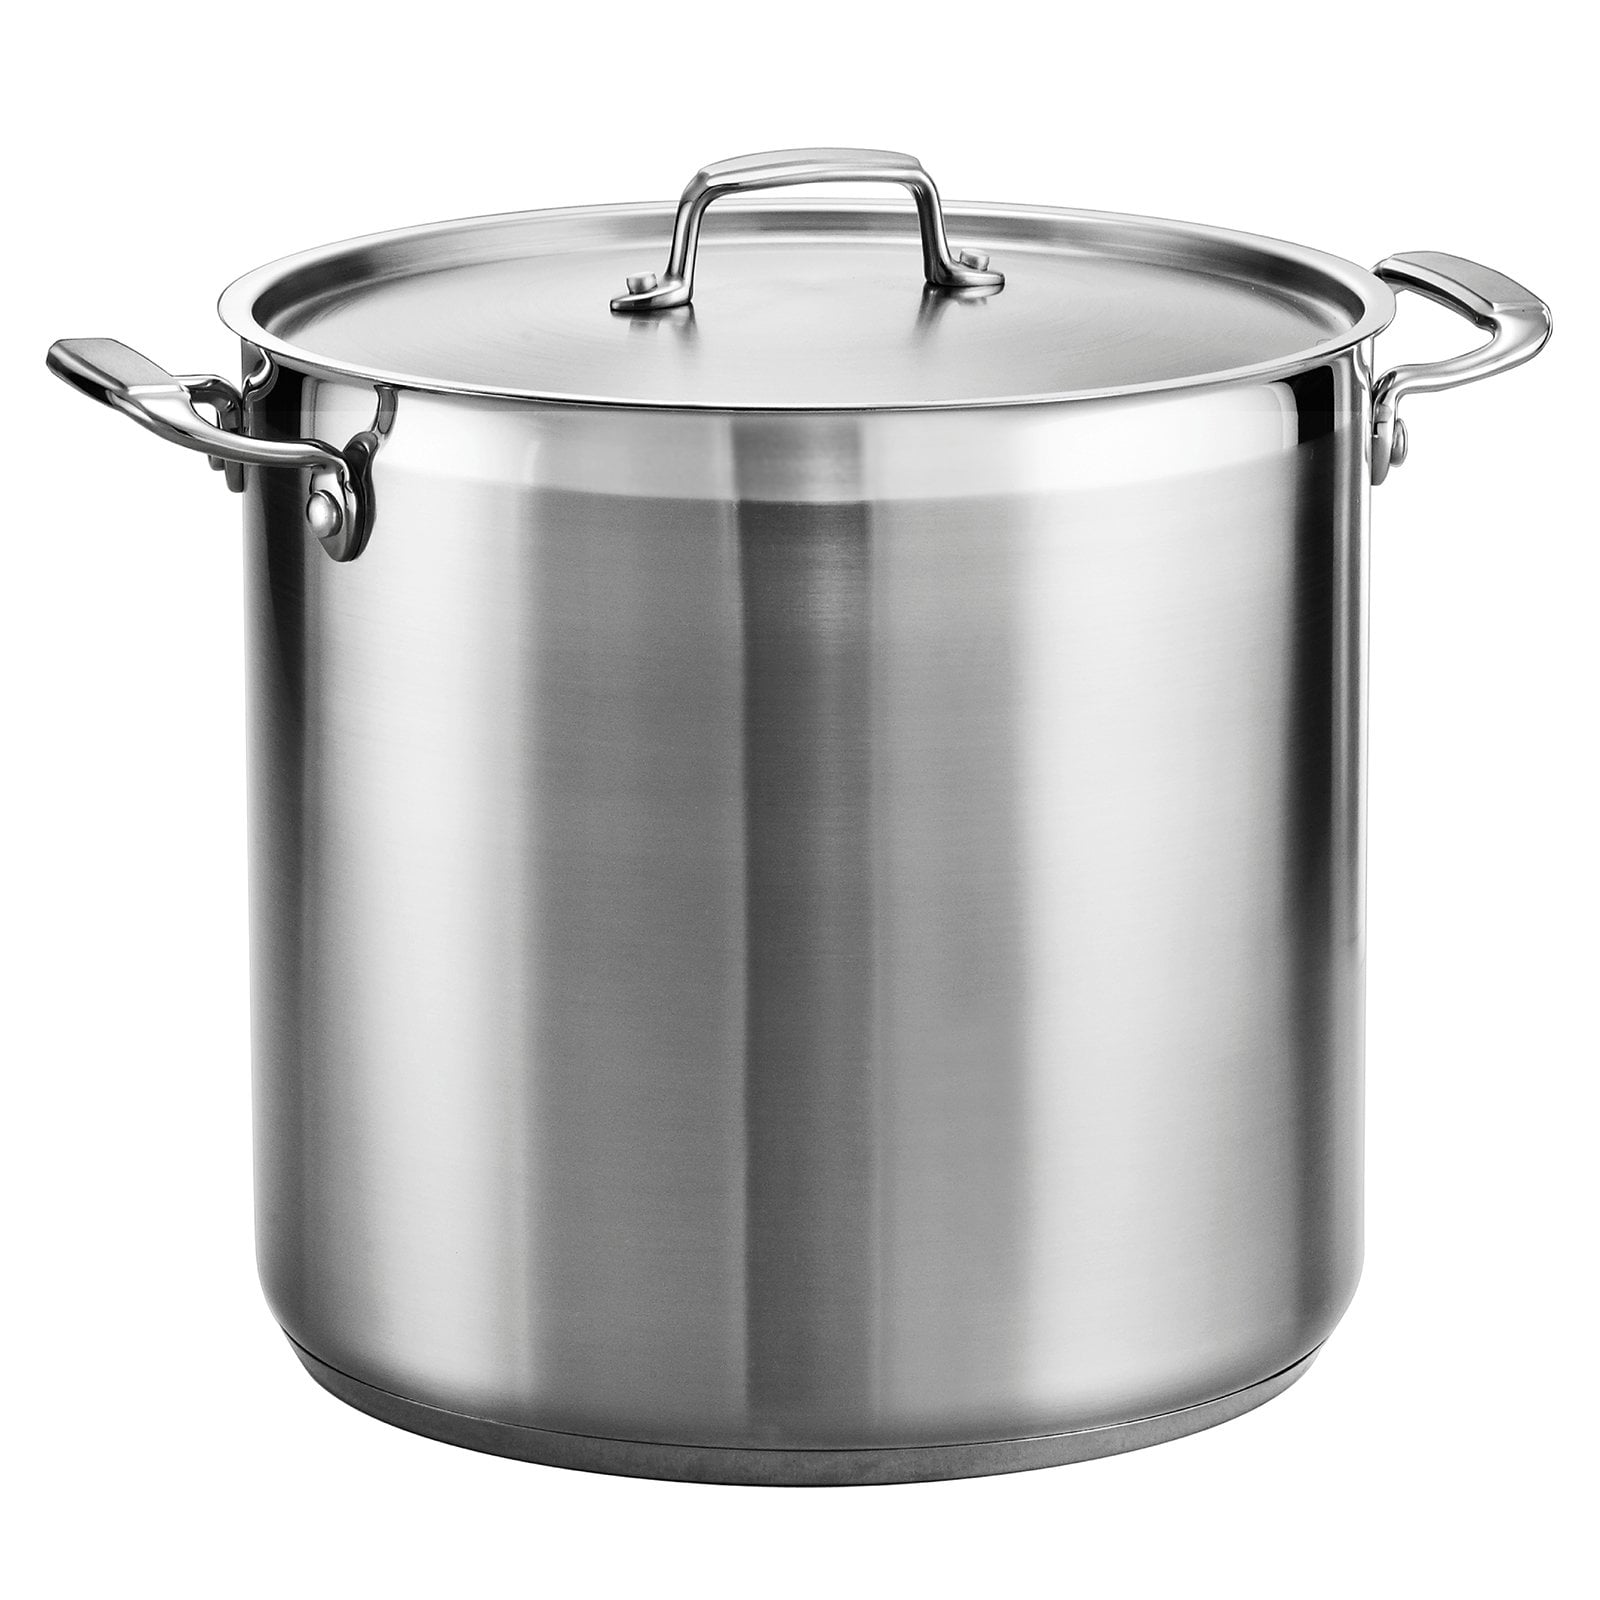 Herogo 10 Quart Stock Pot, 18/10 Stainless Steel Large Cooking Pot with  Lid, 10 QT Metal Pasta Pot for Cooking Chicken Soup, Tri-ply Big Stockpot  for